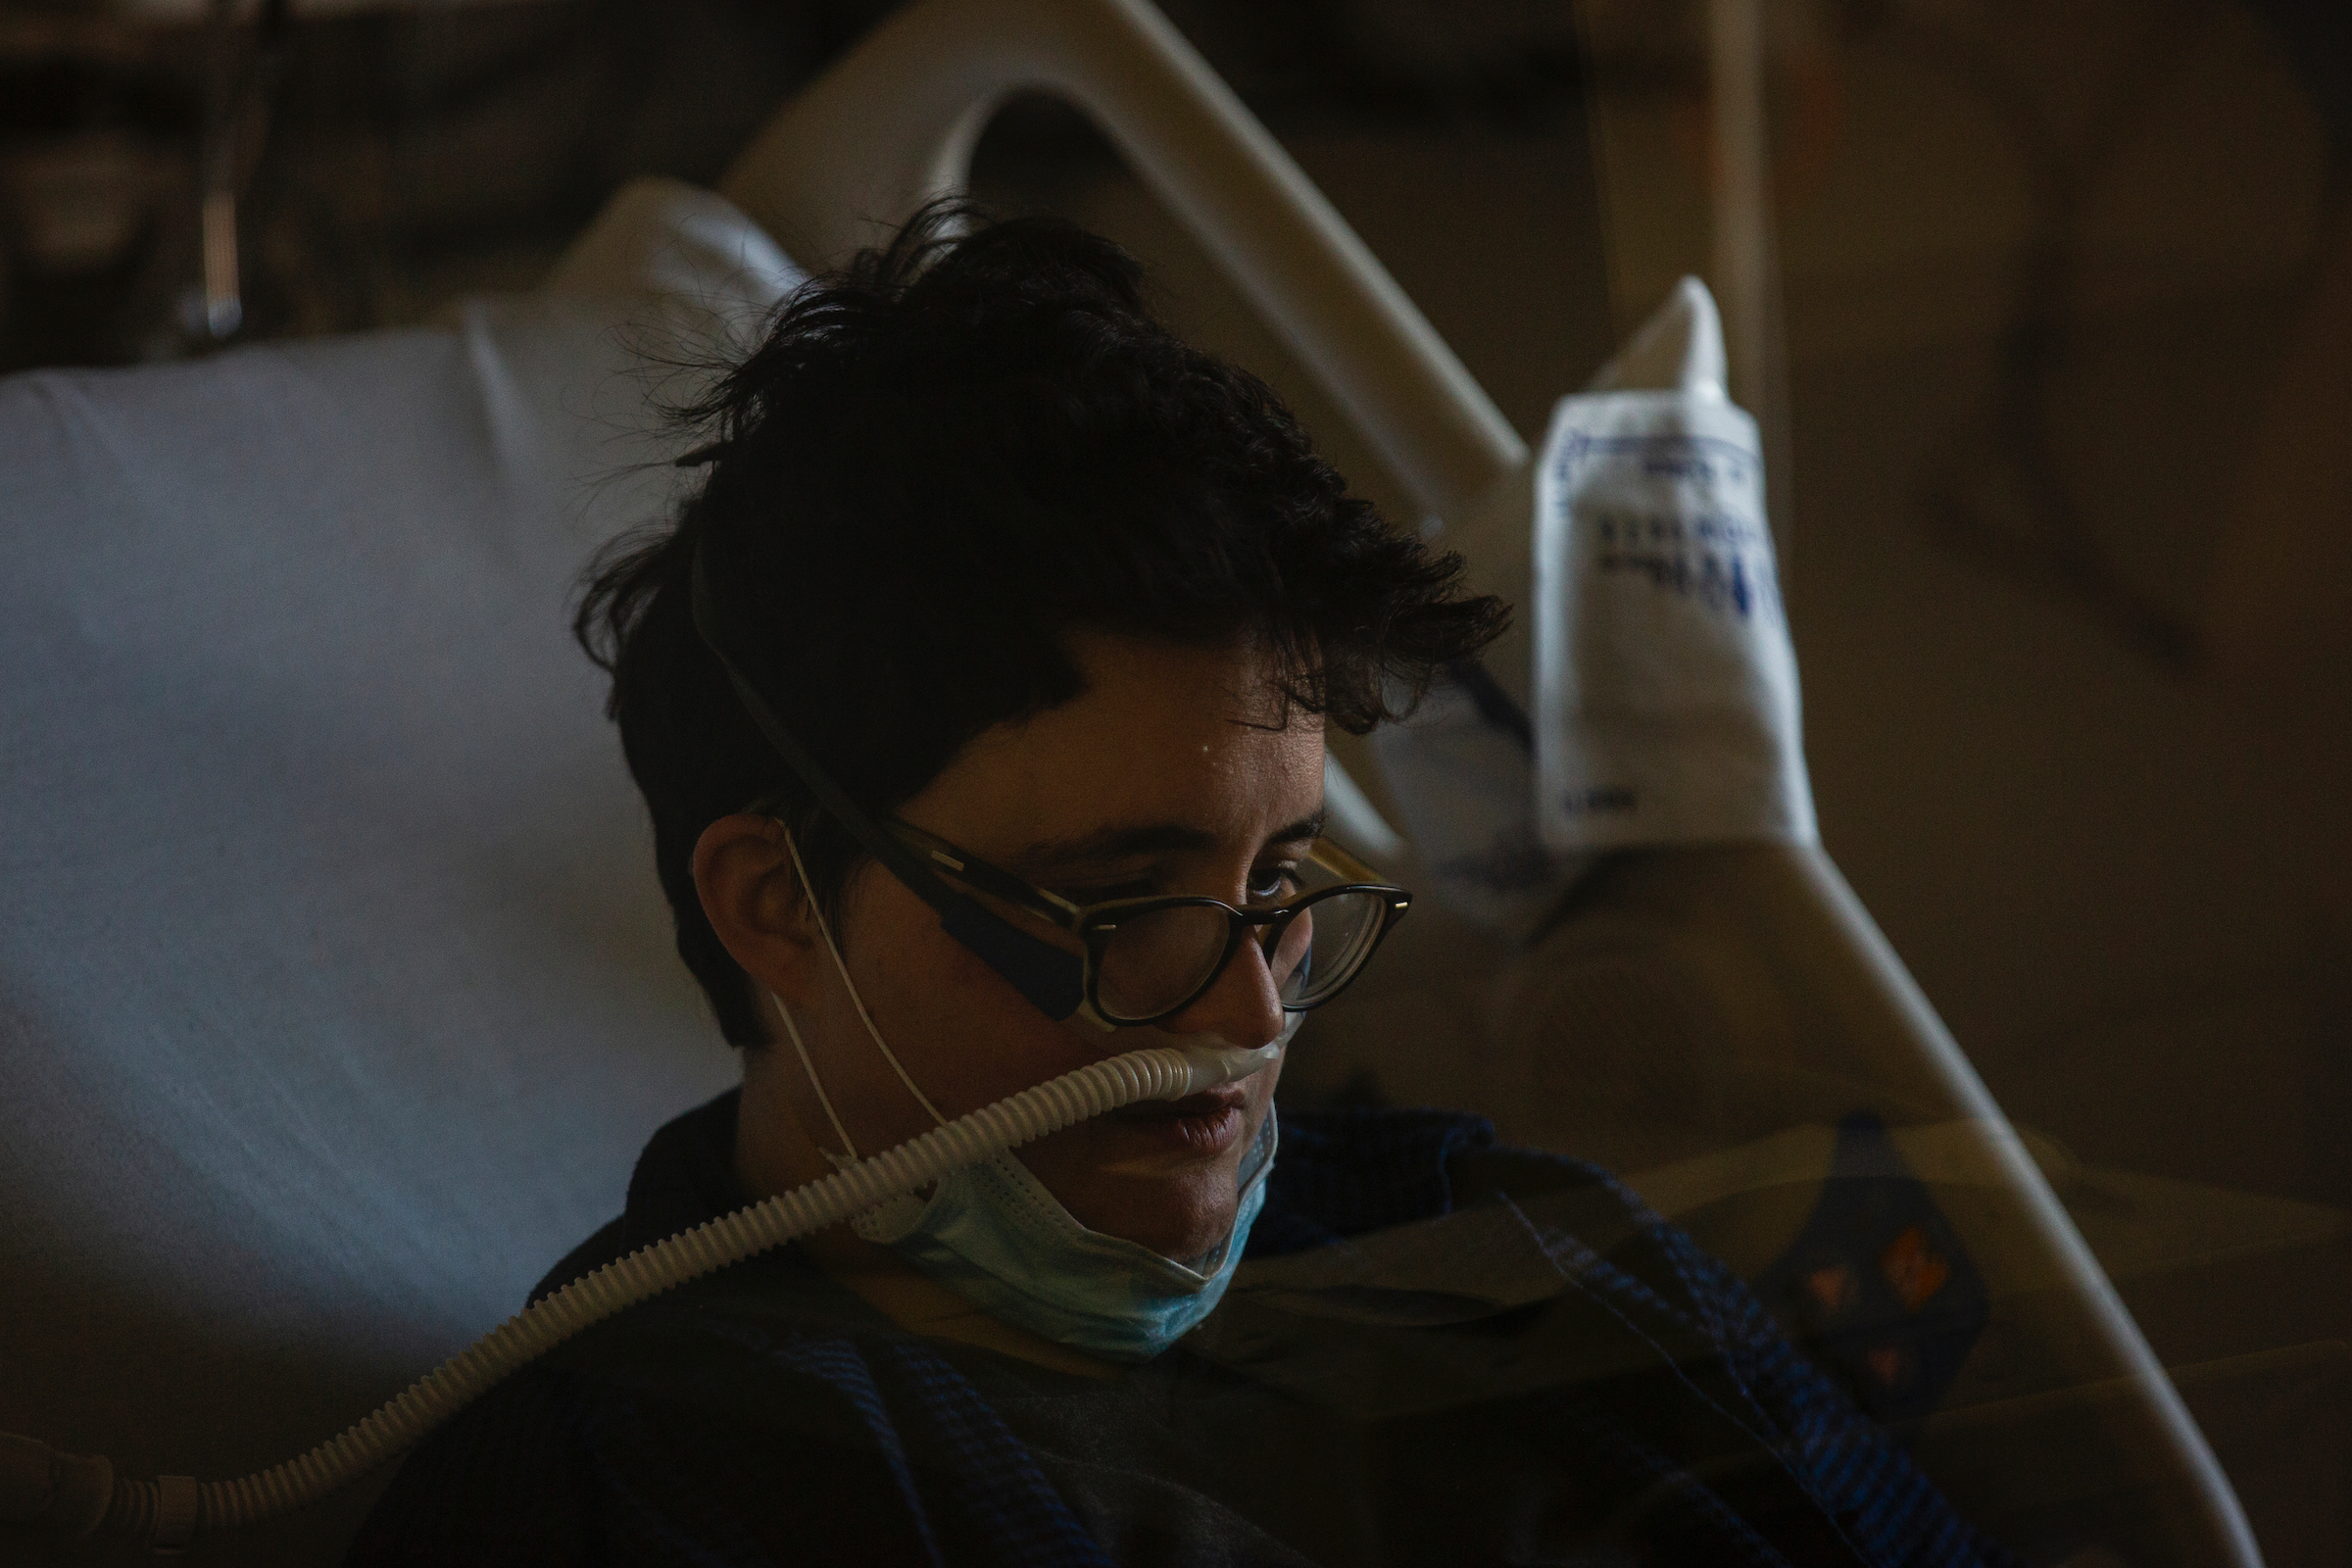 "The hardest part is not being able to breathe. But also, the unknown." Dr. Laura Mulvey, photographed resting in her isolation unit at Maimonides Medical Center in Brooklyn on March 26, was discharged the next day. (Benjamin Norman for TIME)